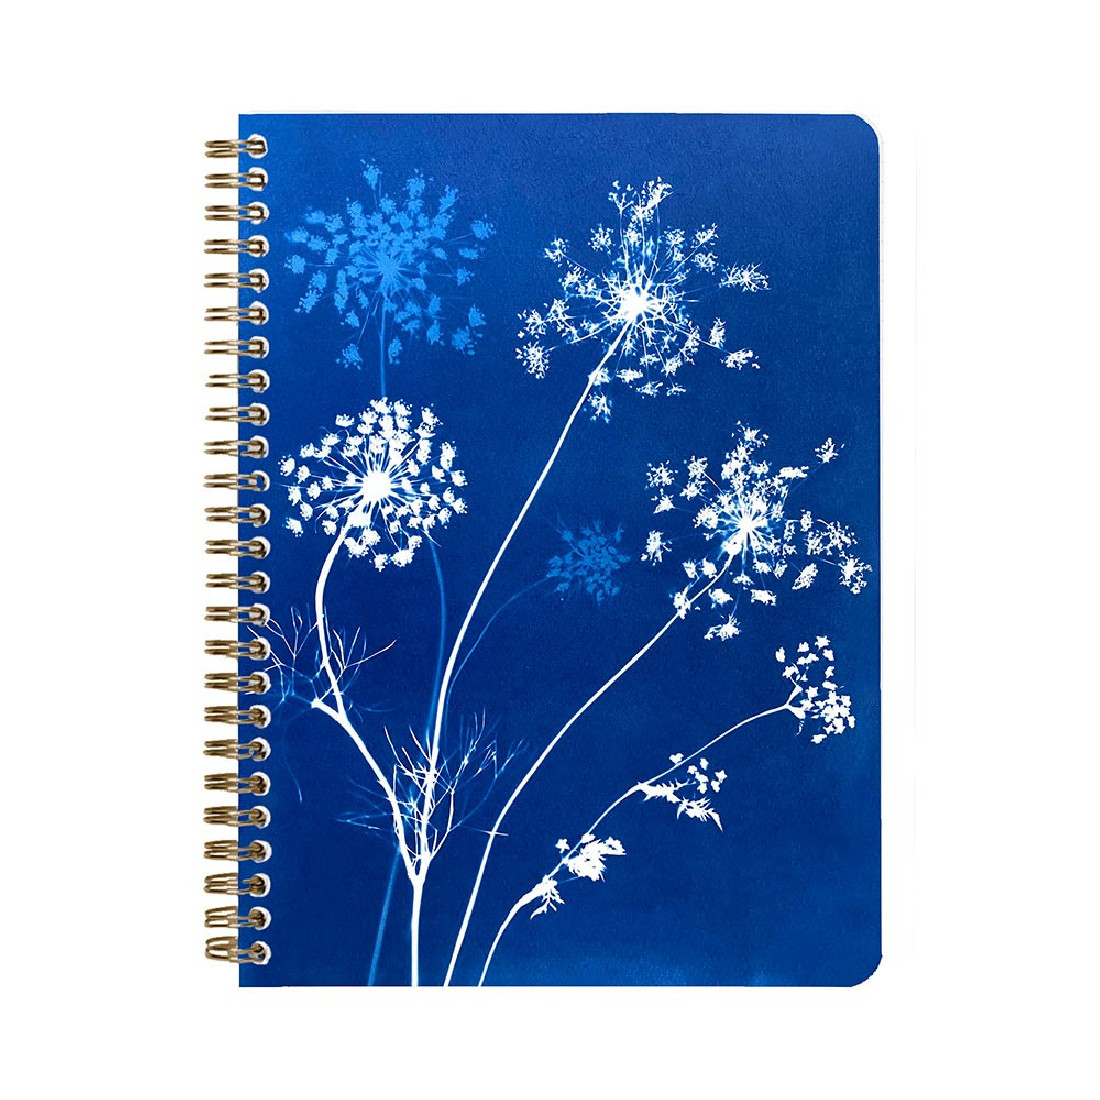 Clairefontaine Rhodia 83504C - A Spiral Notebook with Floral / Cyanotype motifs - A5 14.8x21 cm 148 Pages Lined White paper 90g - Grain paper - Cyanotype Collection